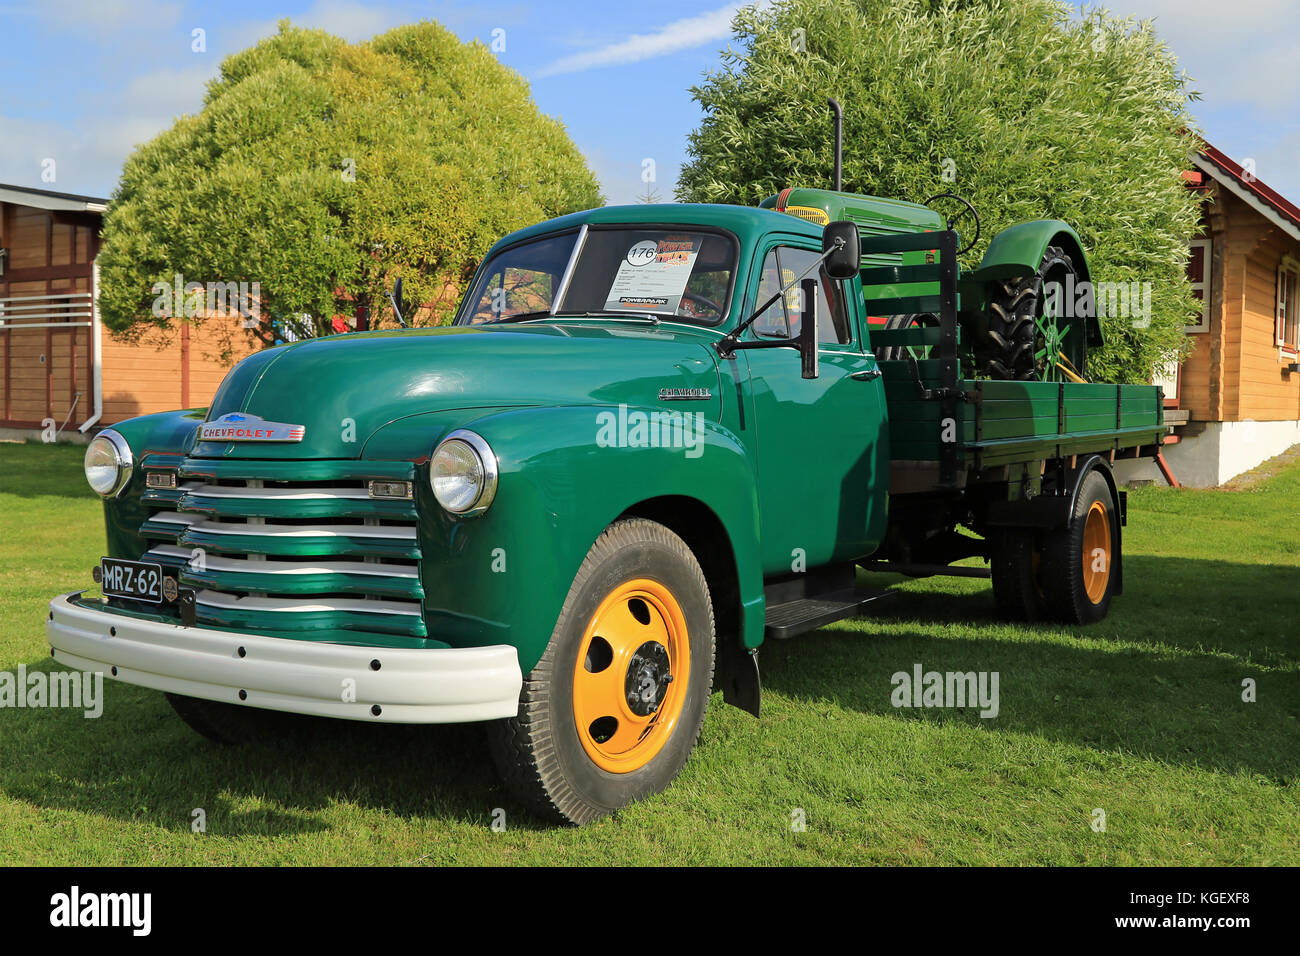 ALAHARMA, FINLAND - AUGUST 8, 2015: Classic Chevrolet 6400 Pickup truck year 1952 and Oliver Standard 70 Agricultural Tractor year 1938 in Power Truck Stock Photo